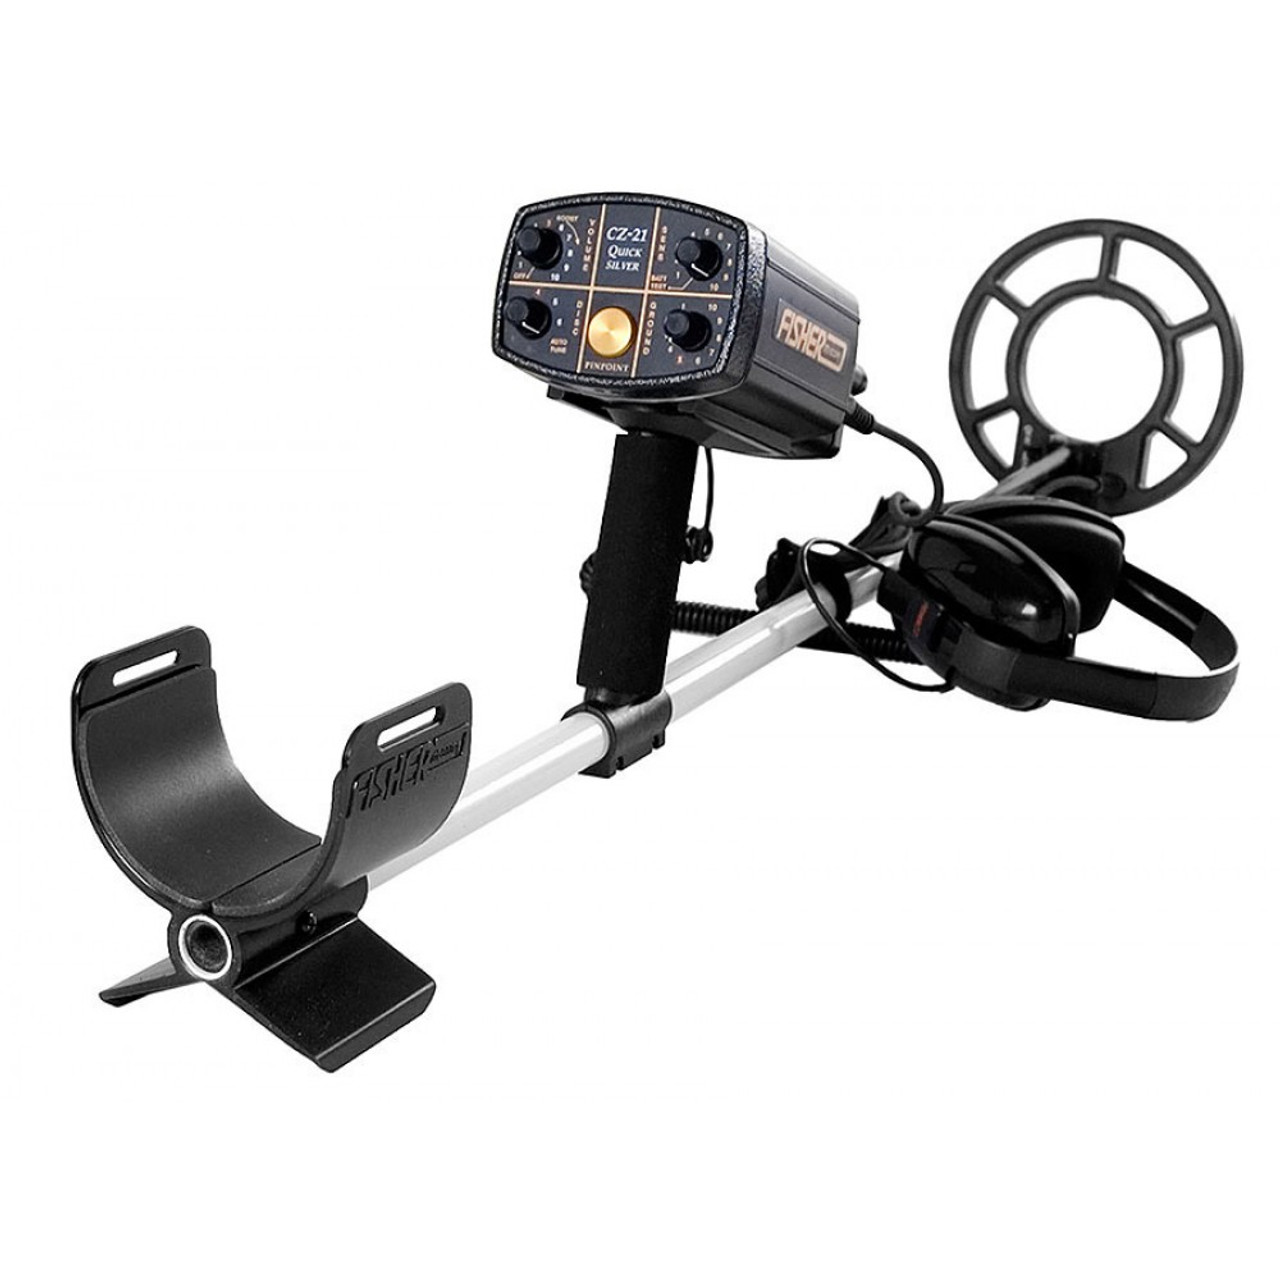 Fisher CZ-21 Metal Detector with 8" Search Coil by Kellyco